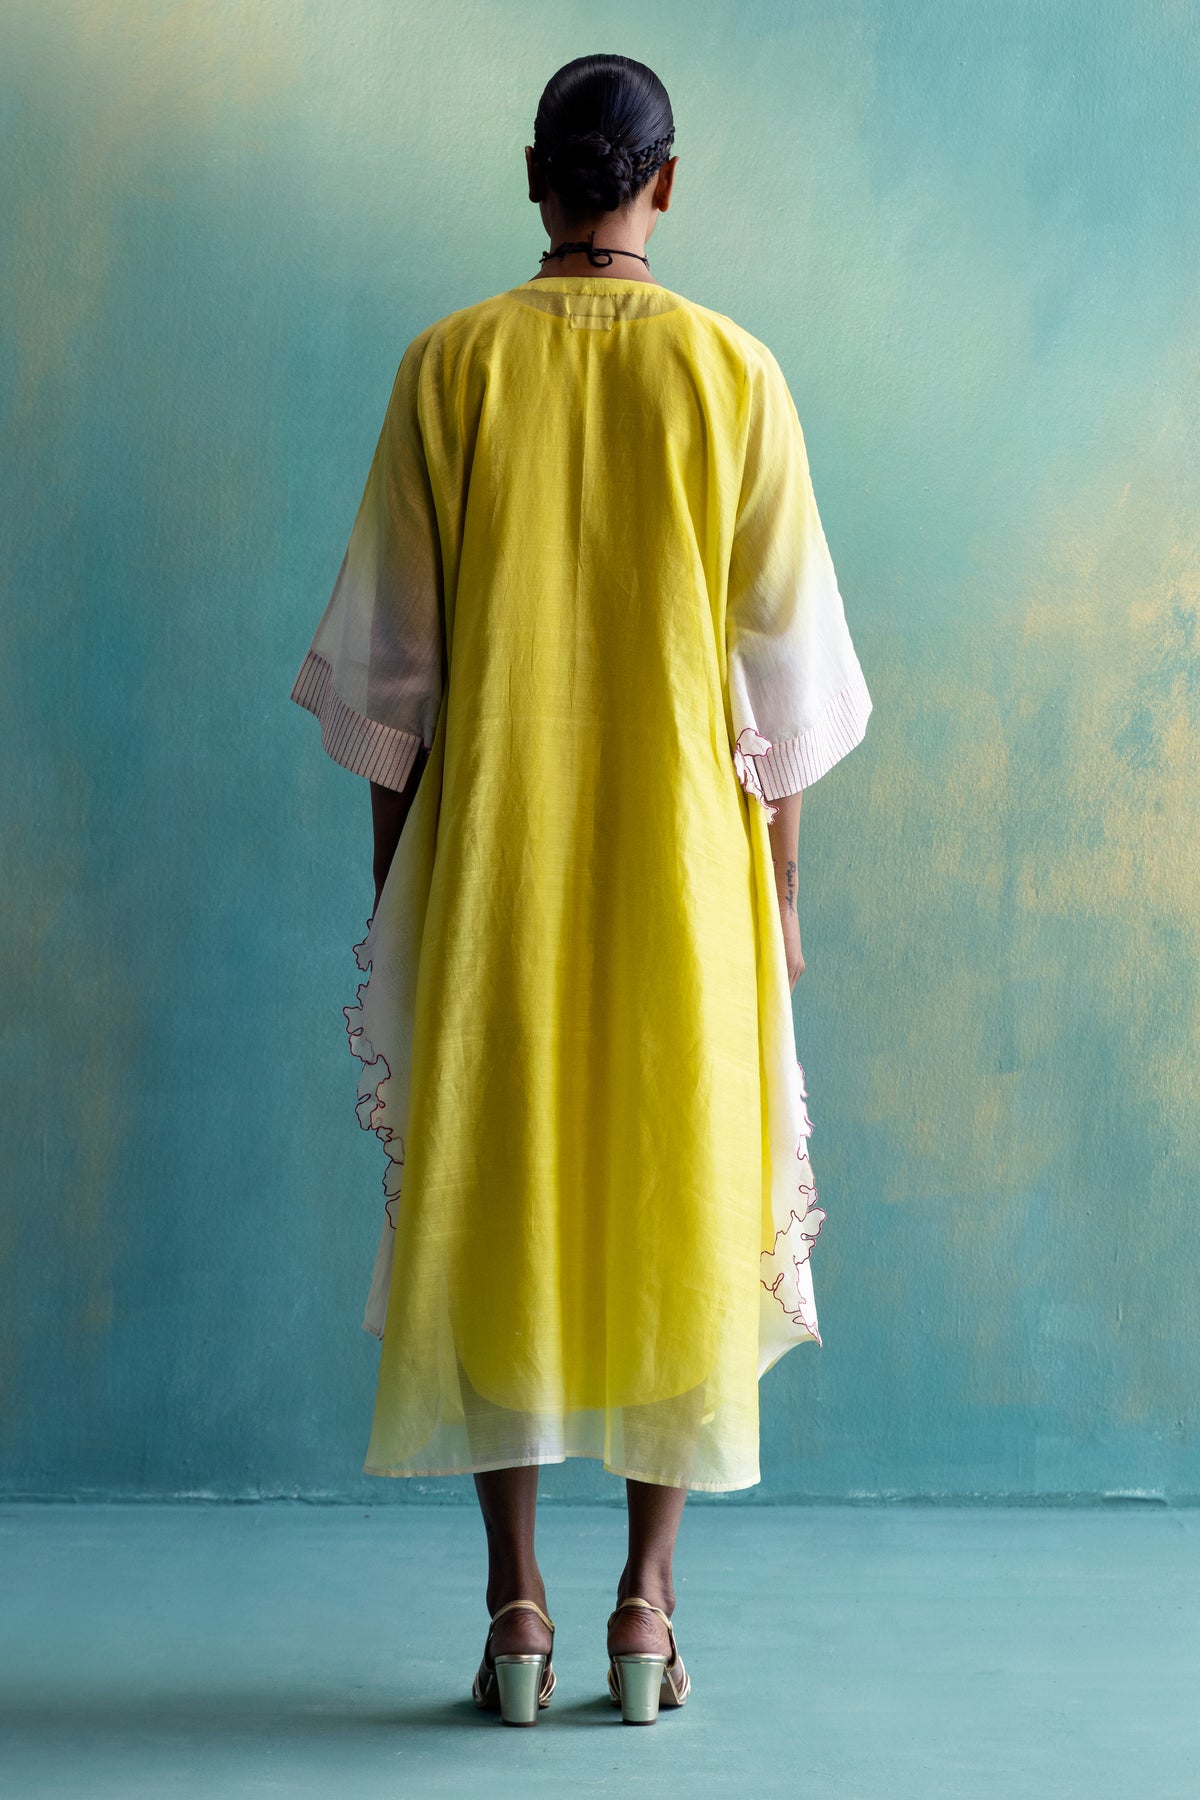 DIL-KASH DIP DYE YELLOW AND OFF-WHITE CHANDERI  V-NECK EMBROIDERY KAFTAAN